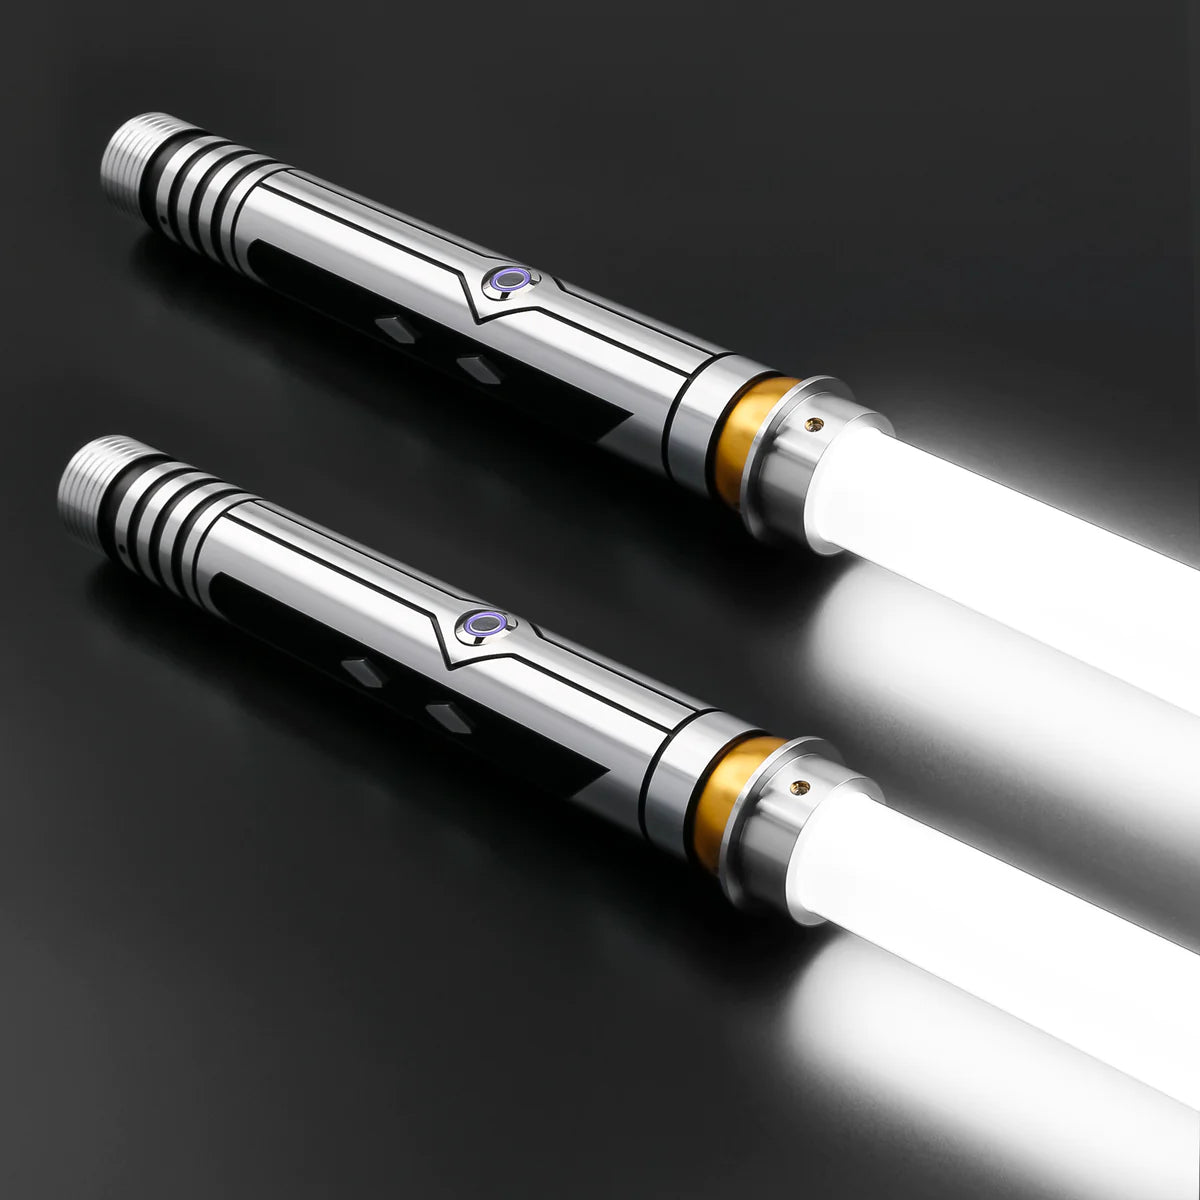 THE EXO TANO LIGHTSABER PAIR